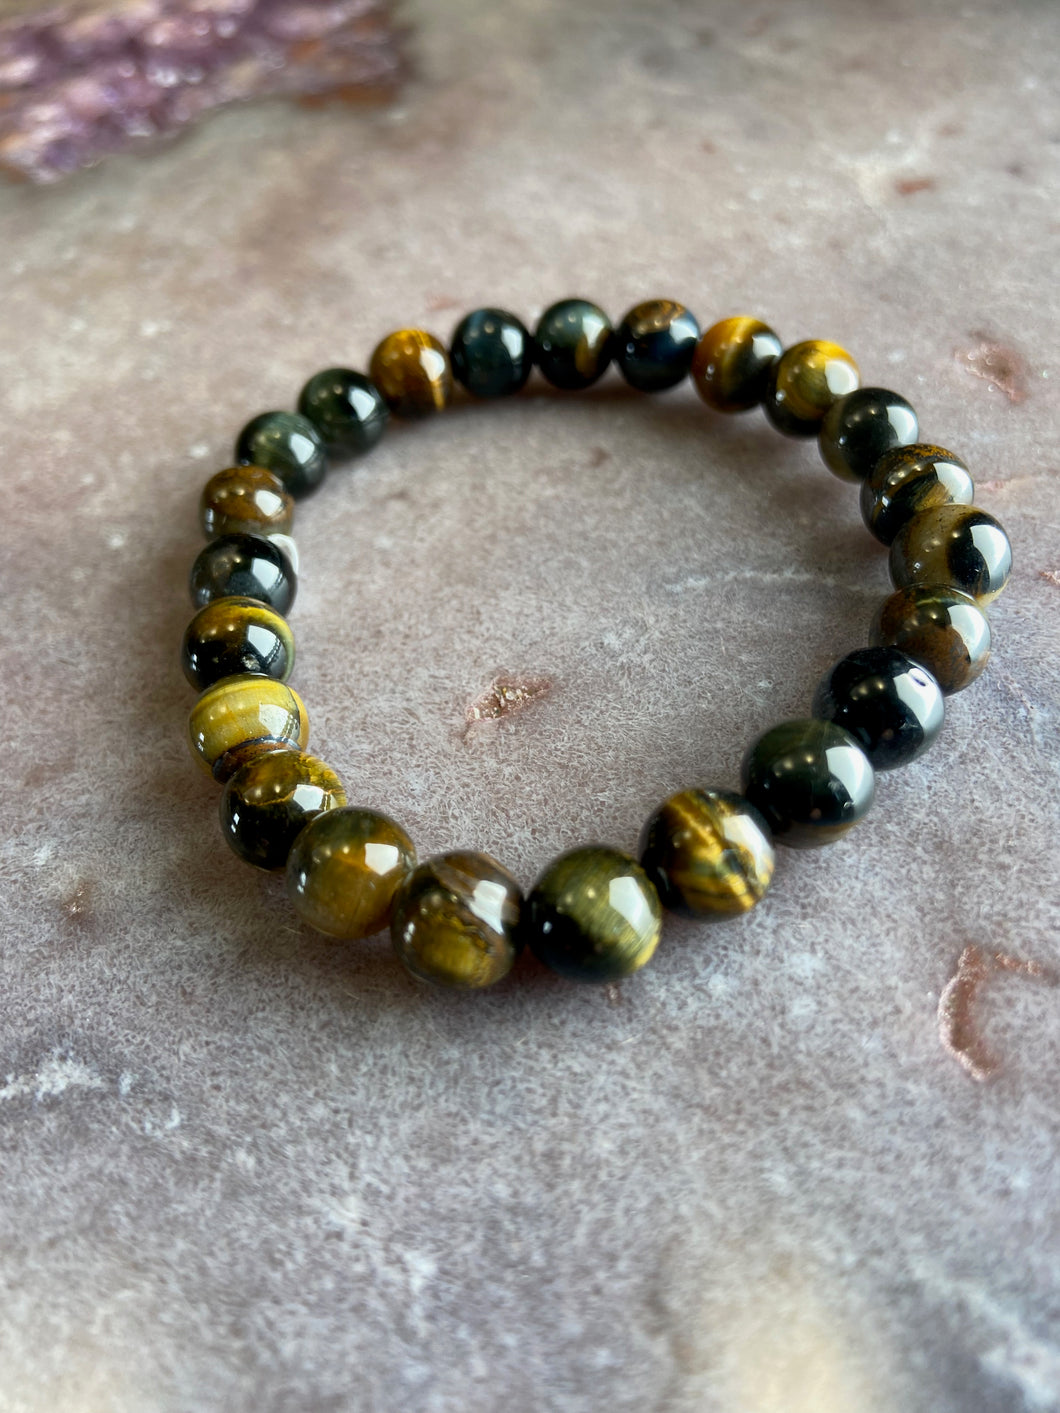 Blue and brown tigers eye stretchy bracelet